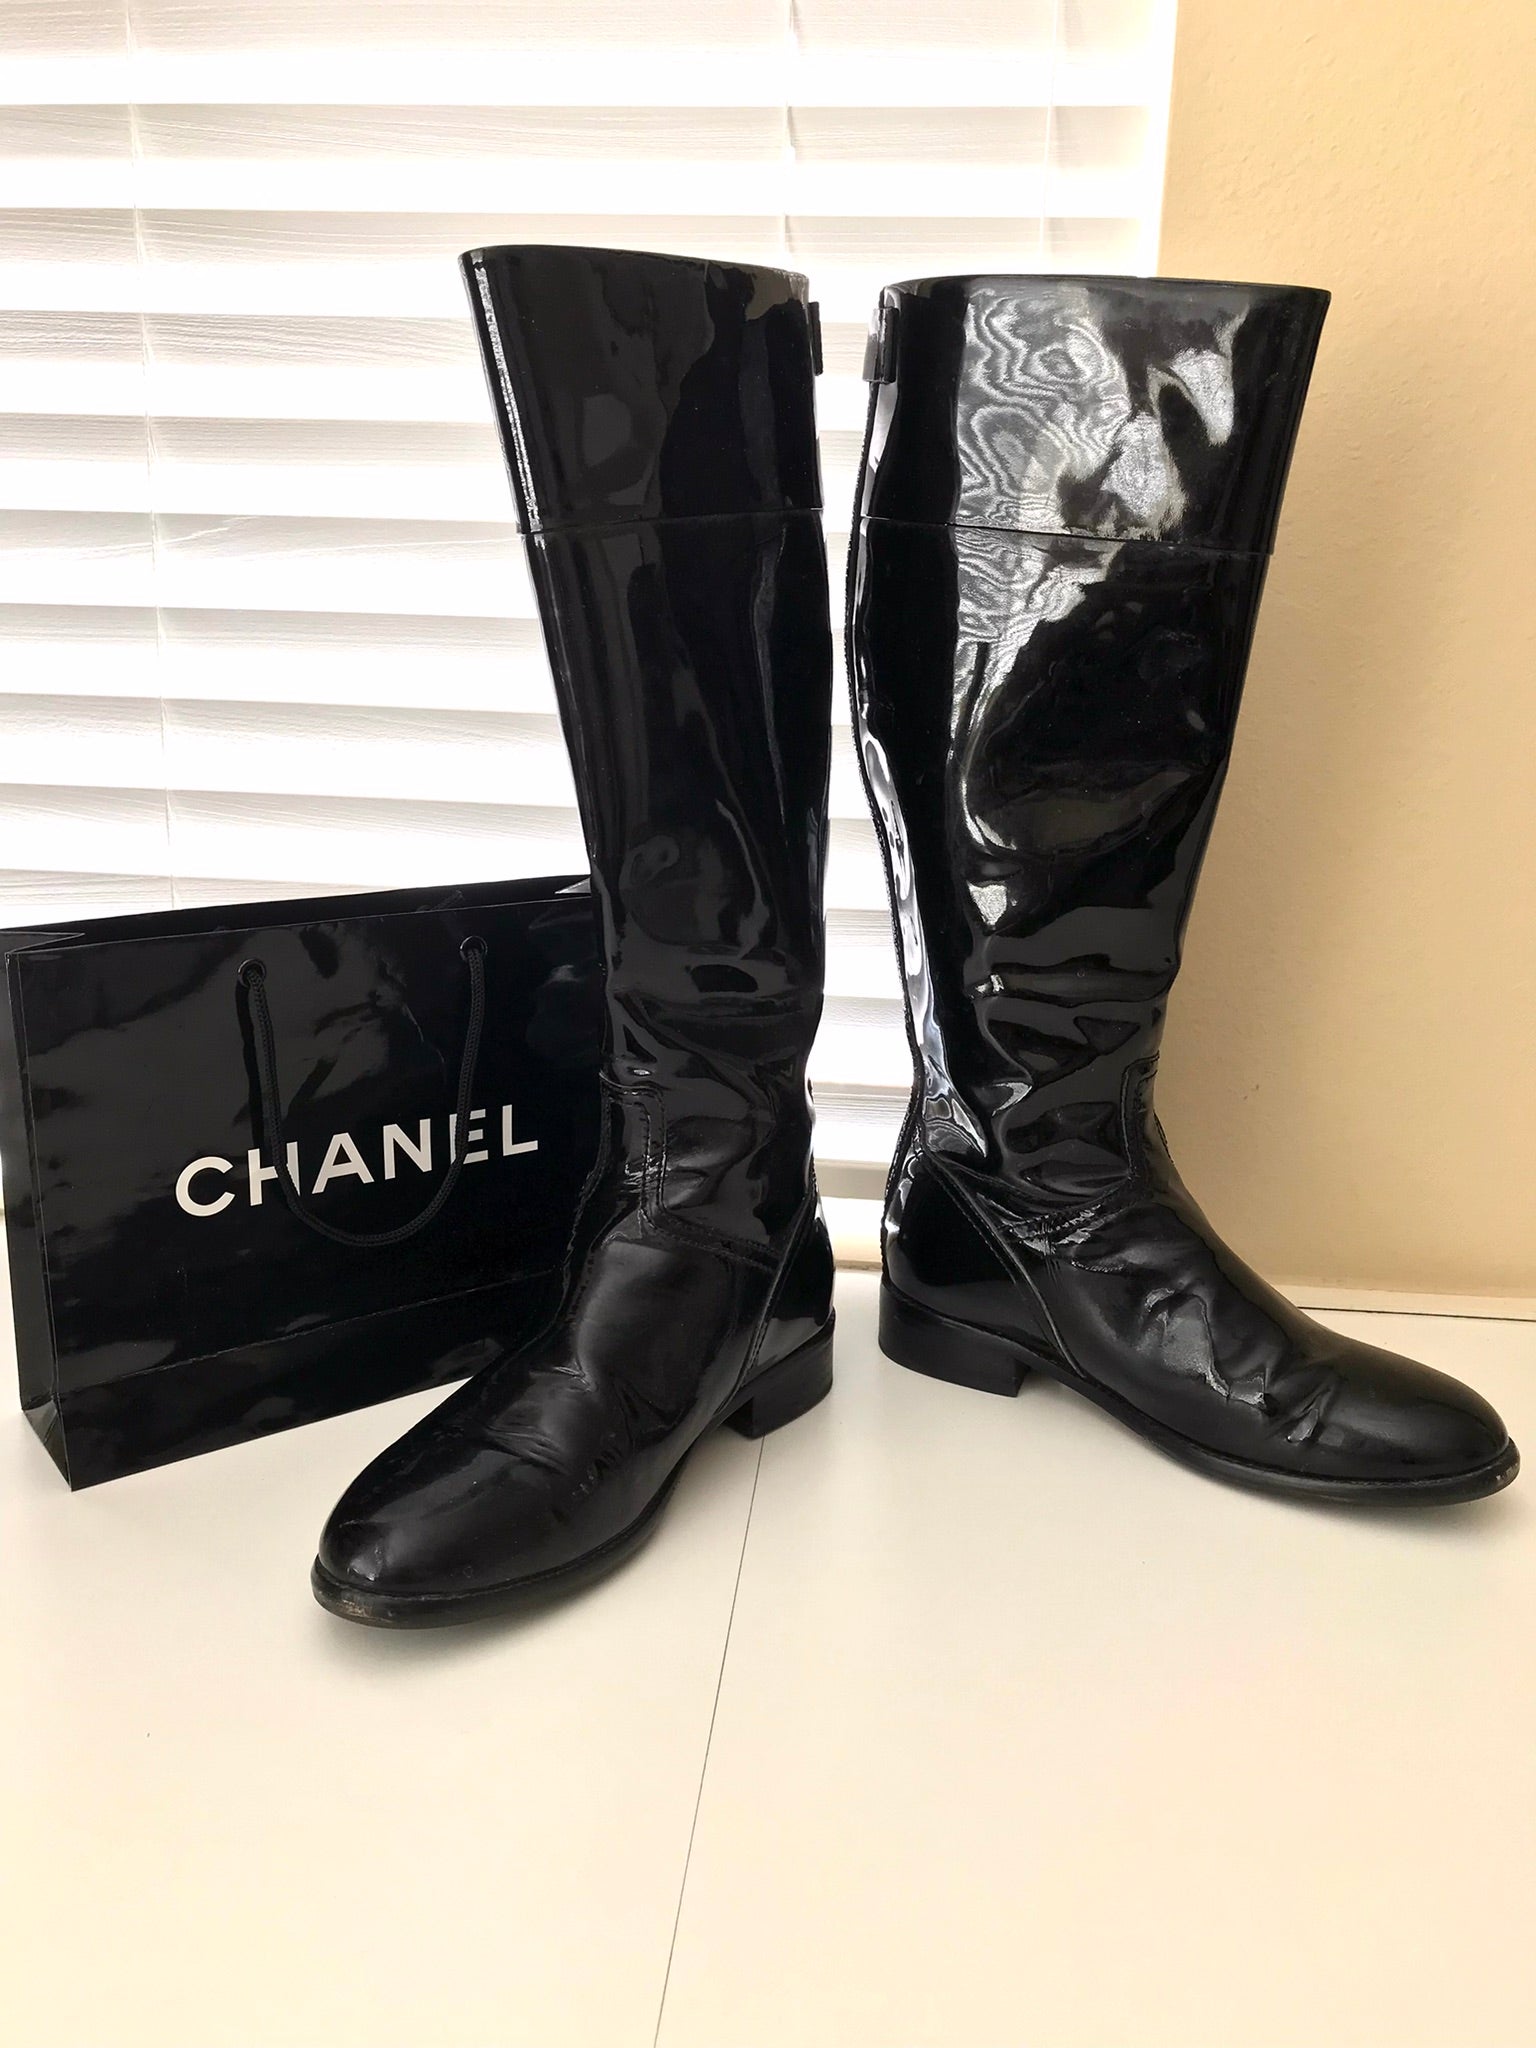 Vintage Chanel Riding Boots size 10 US, 40 EU at 1stDibs